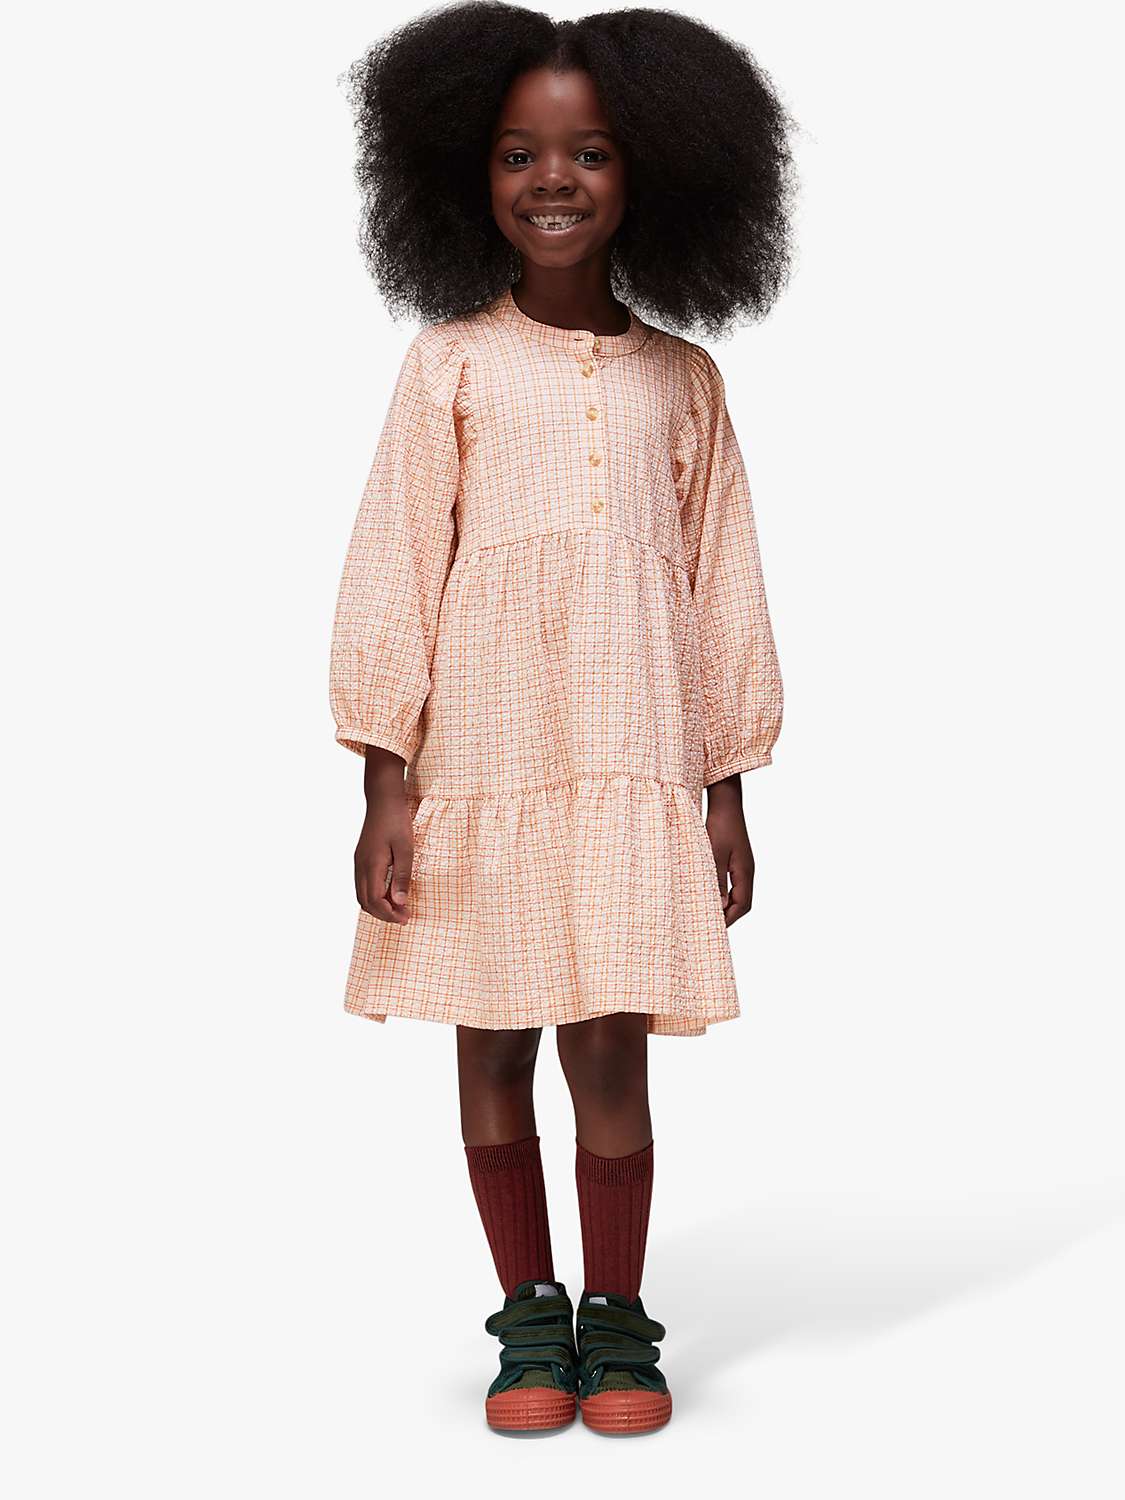 Buy Whistles Kids' Nora Check Tiered Dress, Pale Pink/Multi Online at johnlewis.com